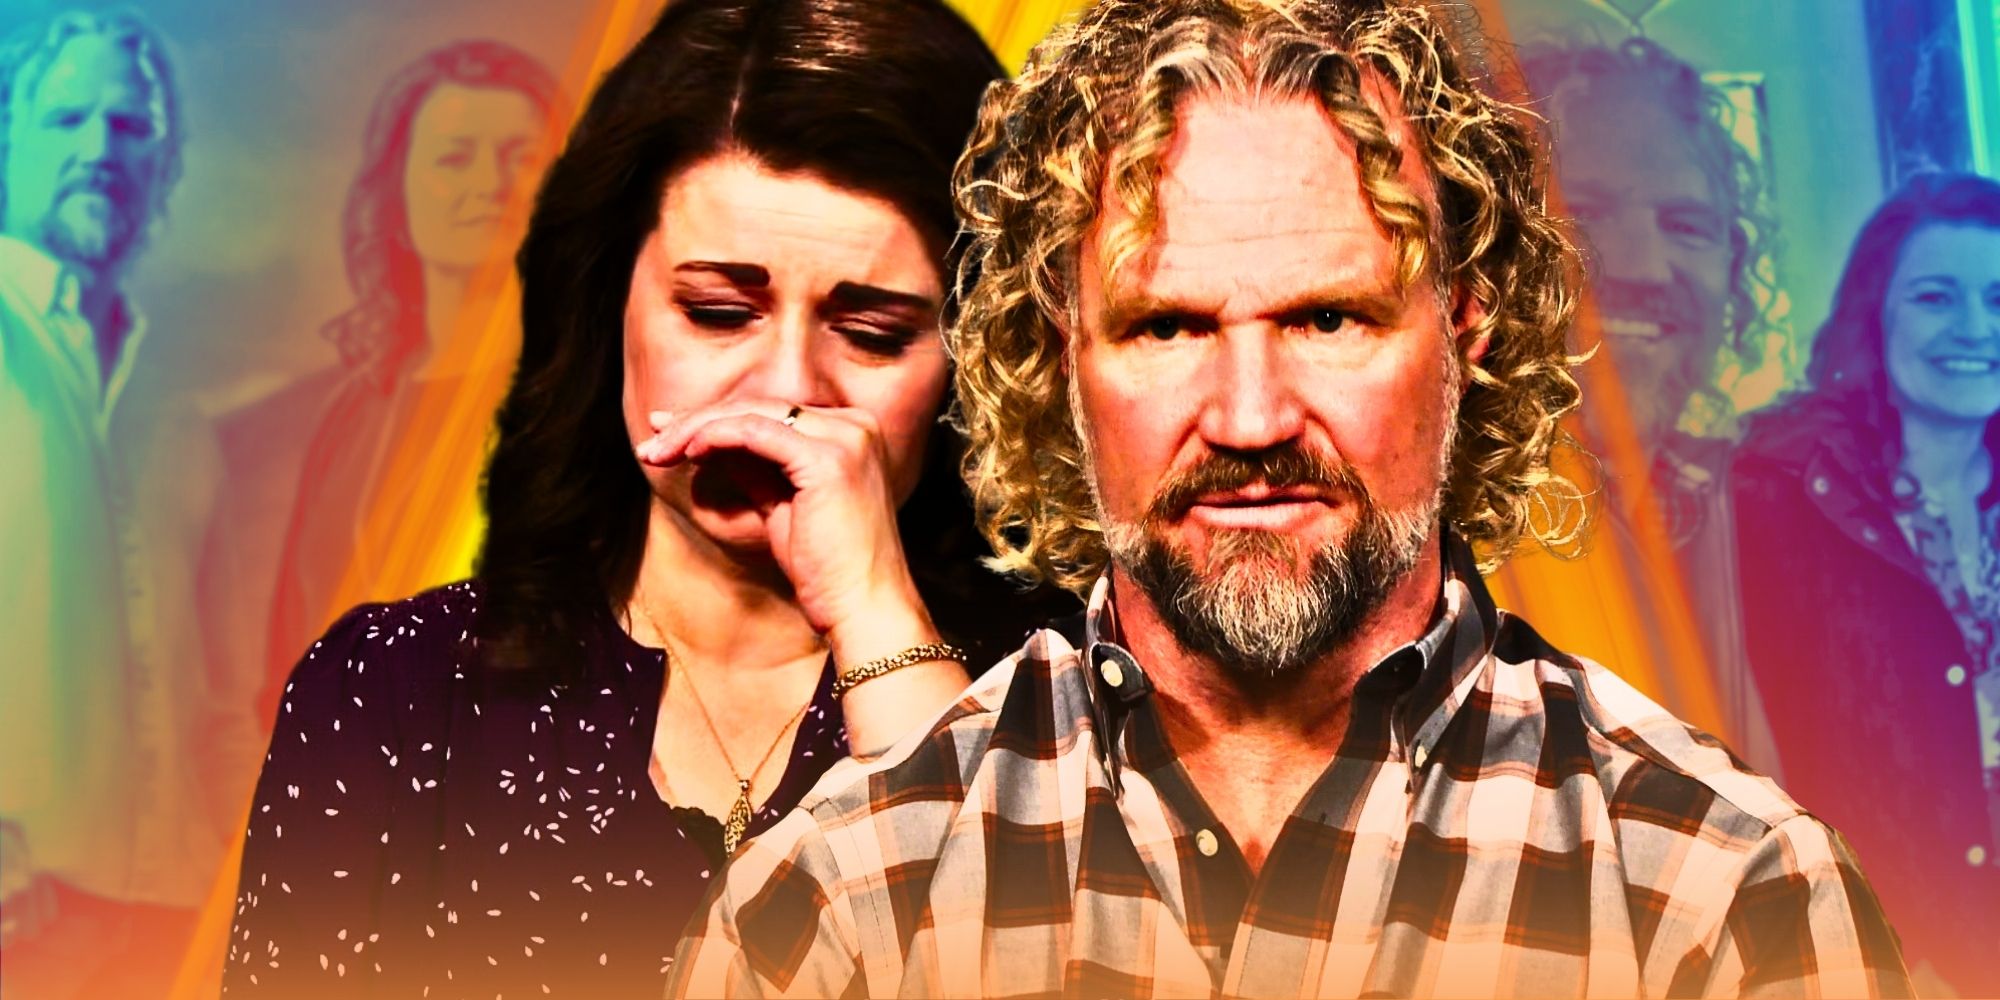 Montage of Sister Wives' Robyn and Kody Brown orange and green background kody in plaid shirt robyn sad